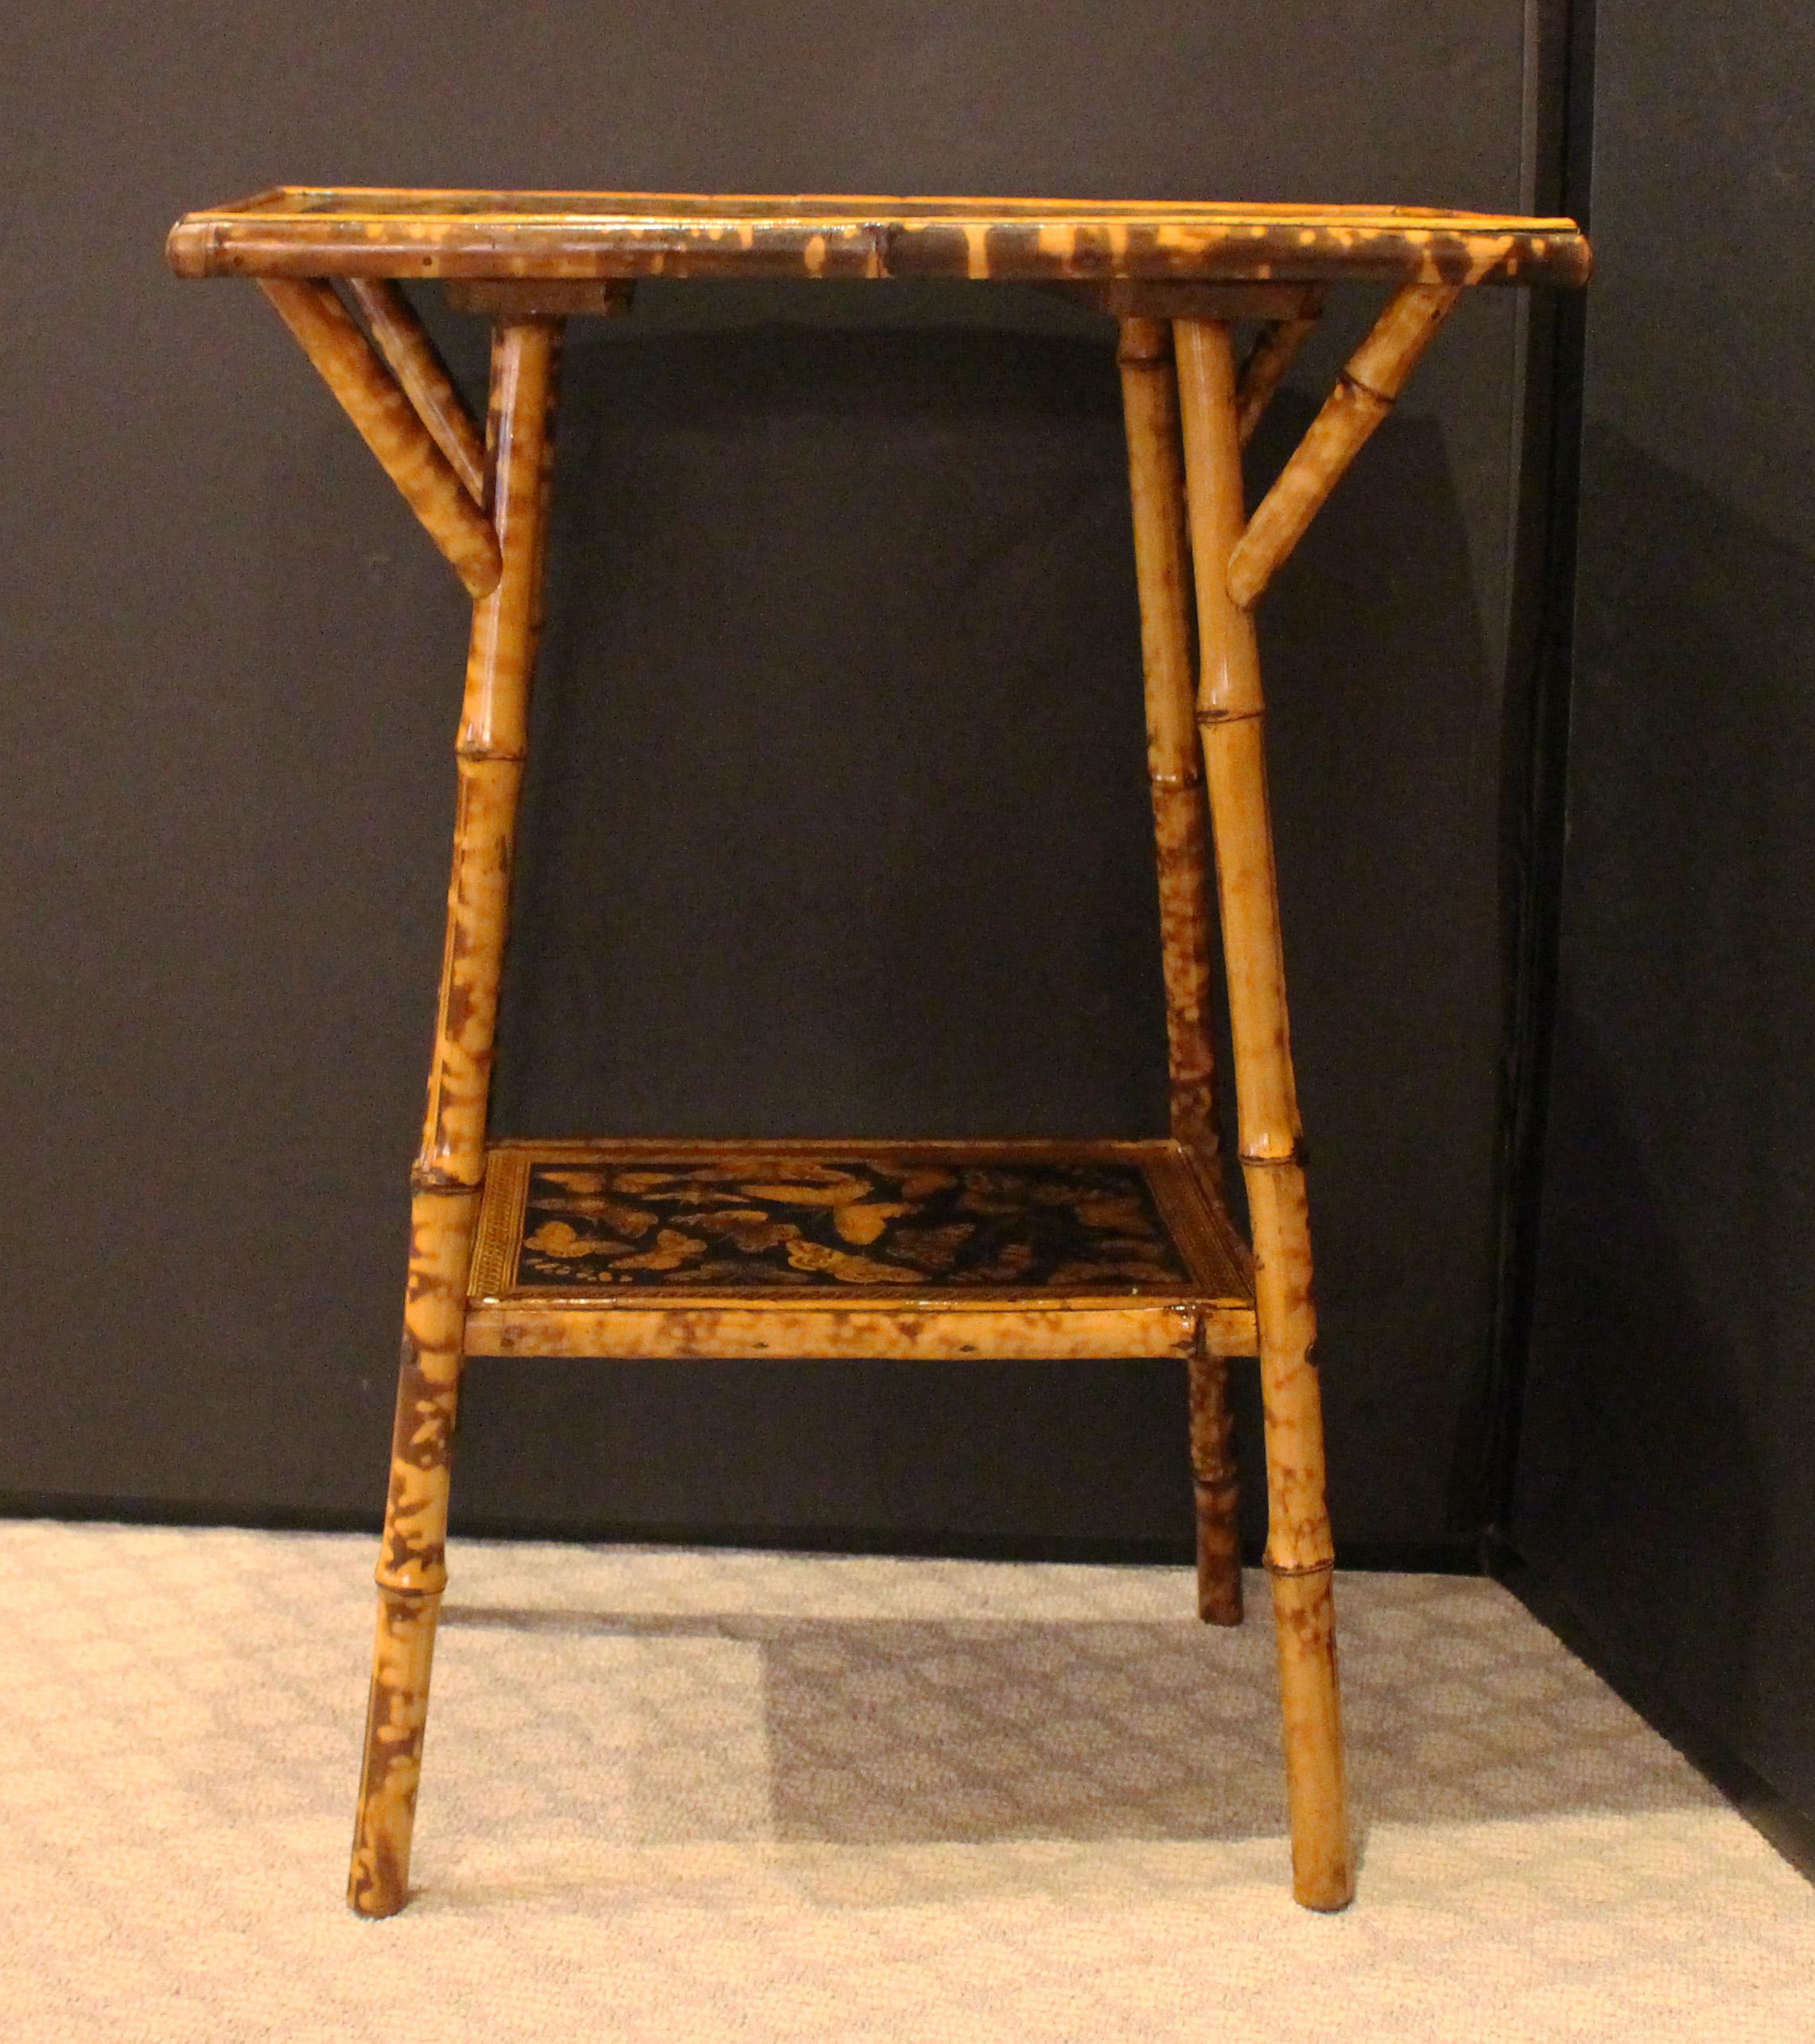 Circa 1870s two-tier rectangular bamboo side table, English. The surfaces now decoupaged with butterflies. Nicely figured bamboo with architectural struts supporting the top for interest and support.
19.25